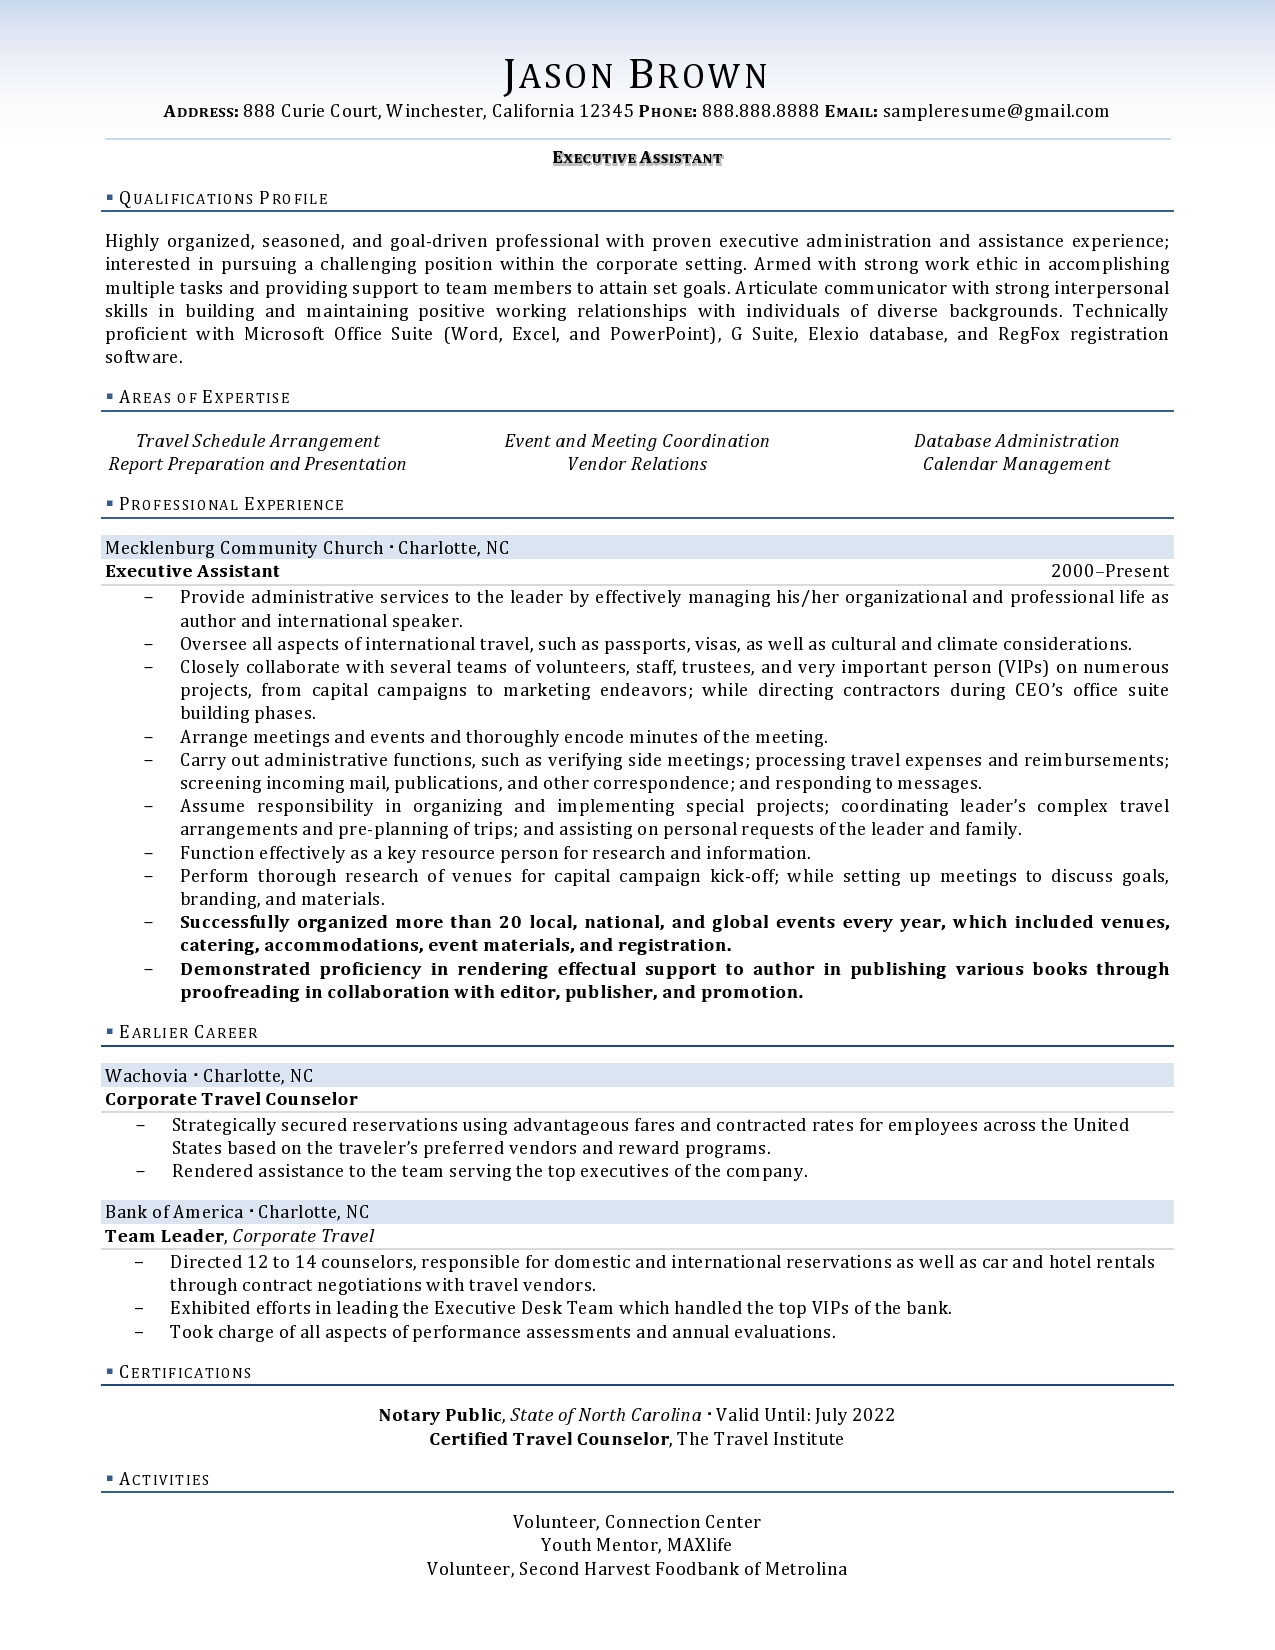 Executive Assistant Resume Examples Resume Professional Writers